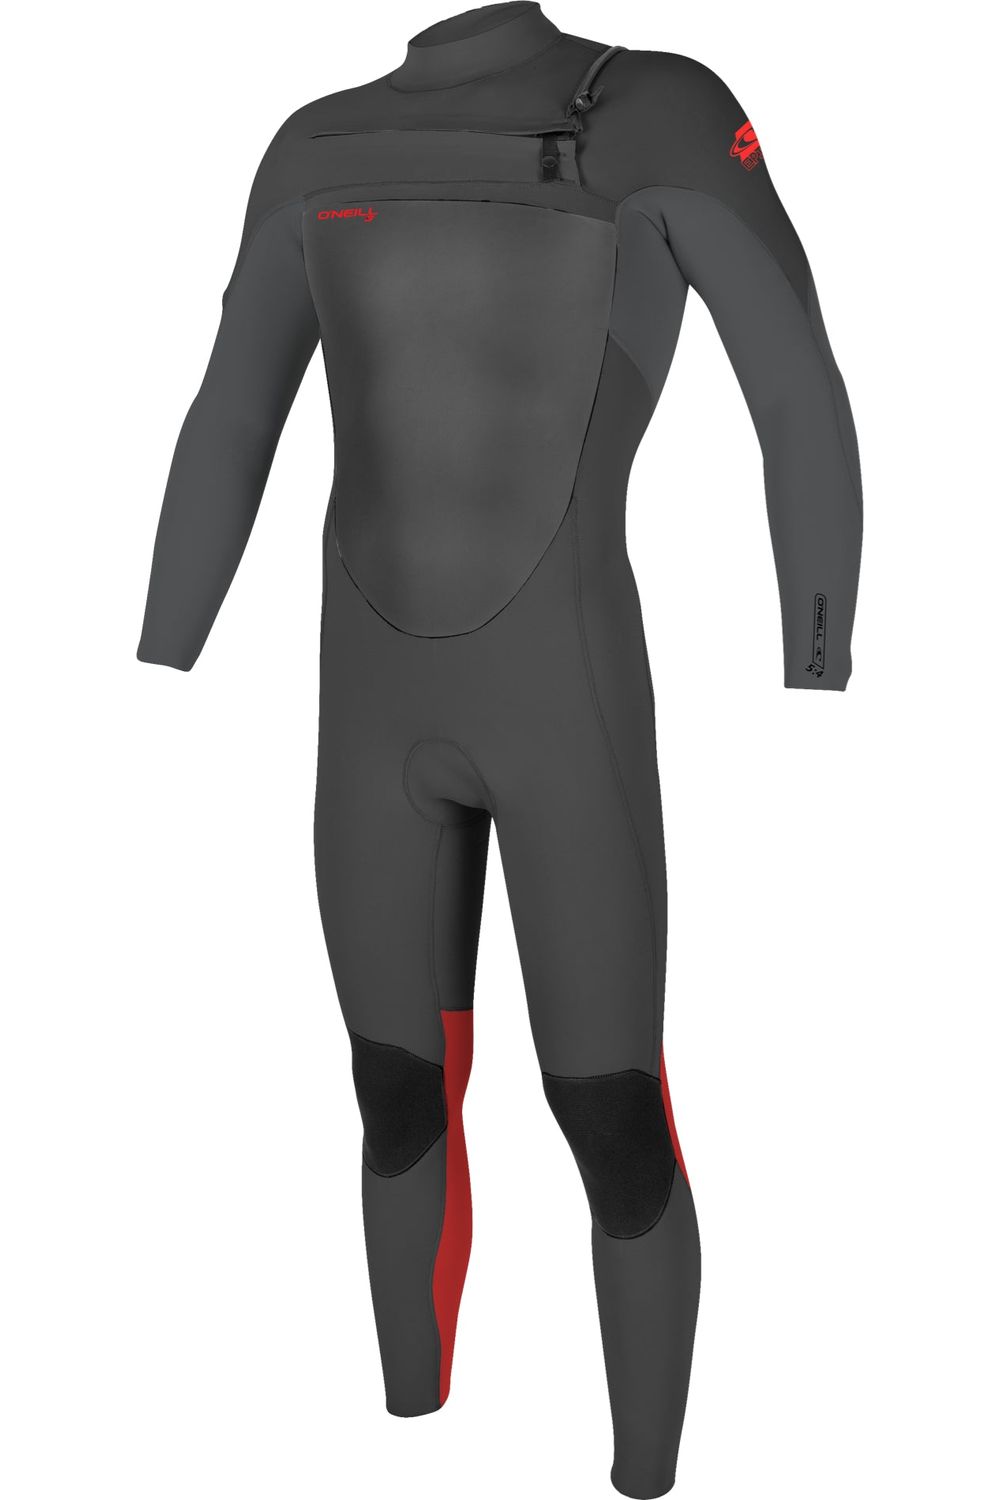 O'Neill Epic Youth Wetsuit 5/4 Chest Zip Full Graphite Smoke Red